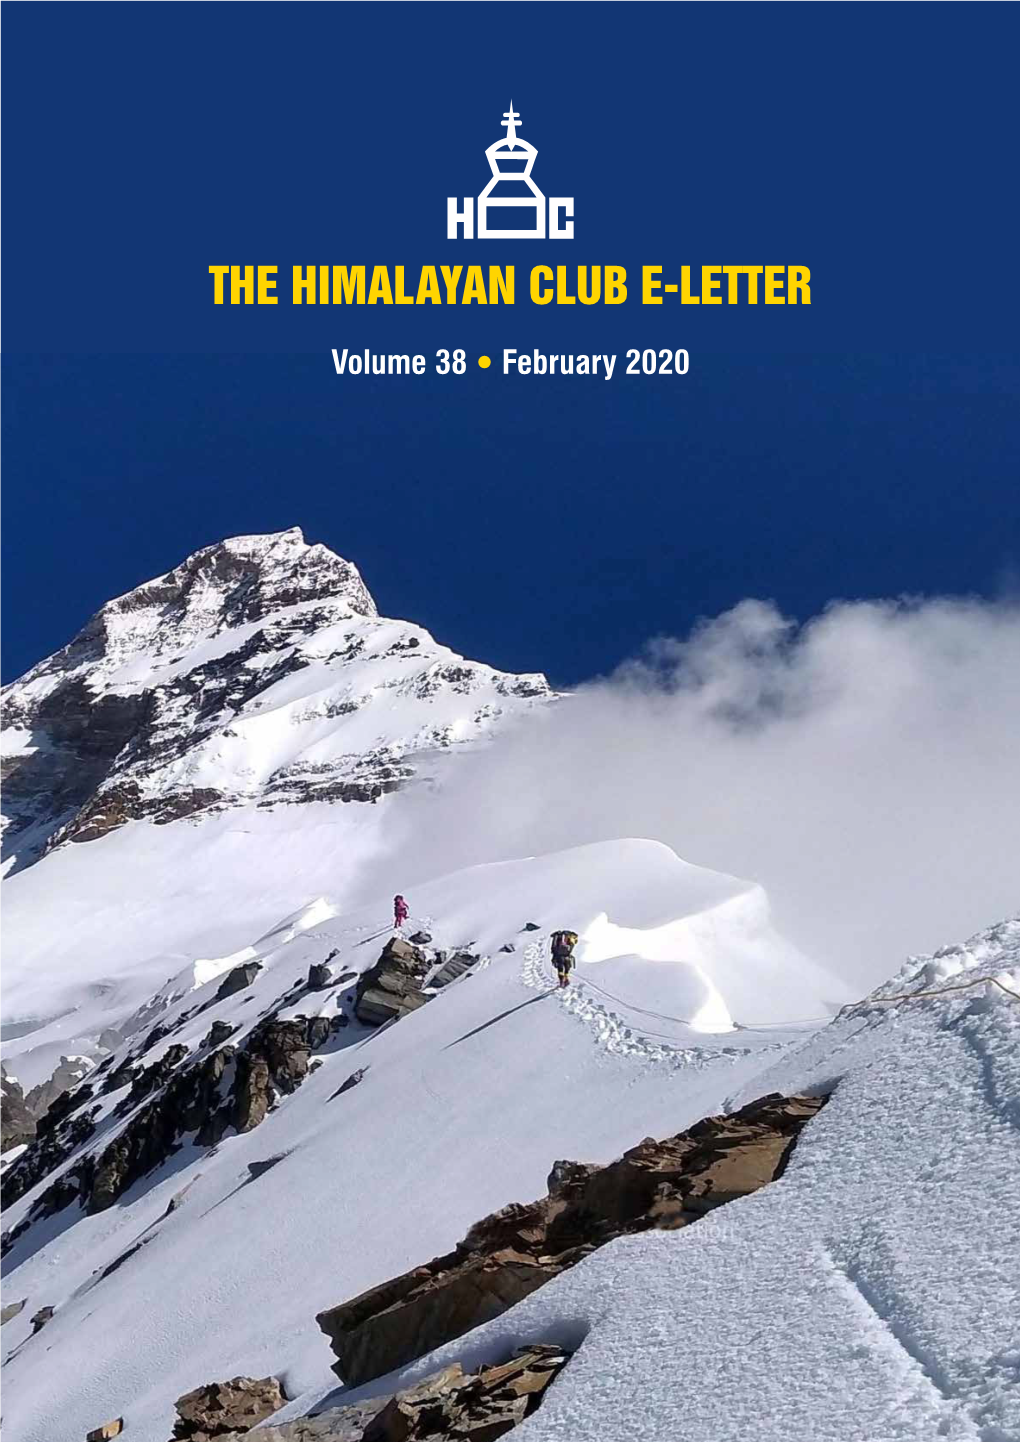 The Himalayan Club E-Letter